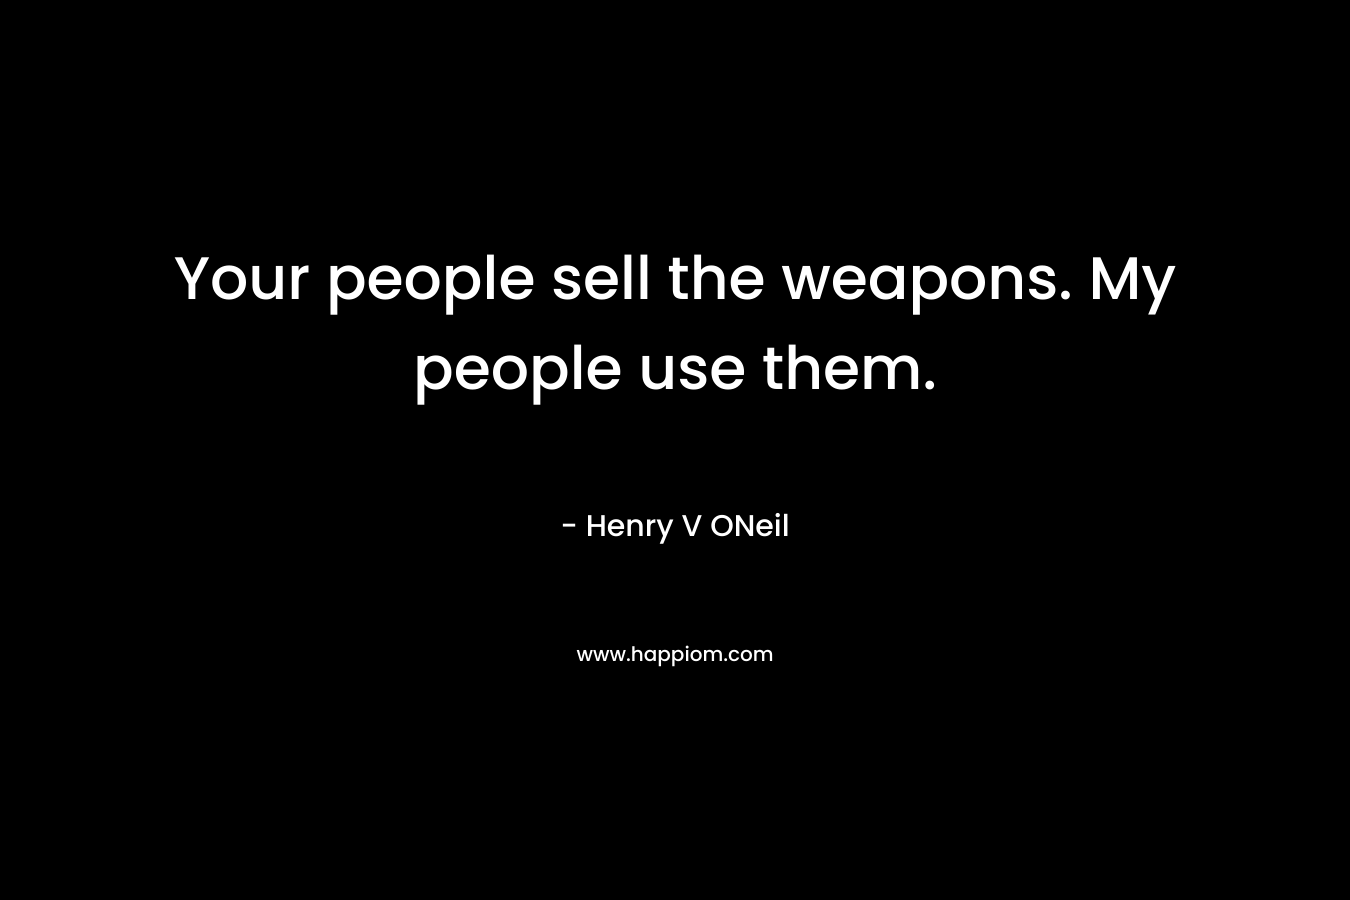 Your people sell the weapons. My people use them.